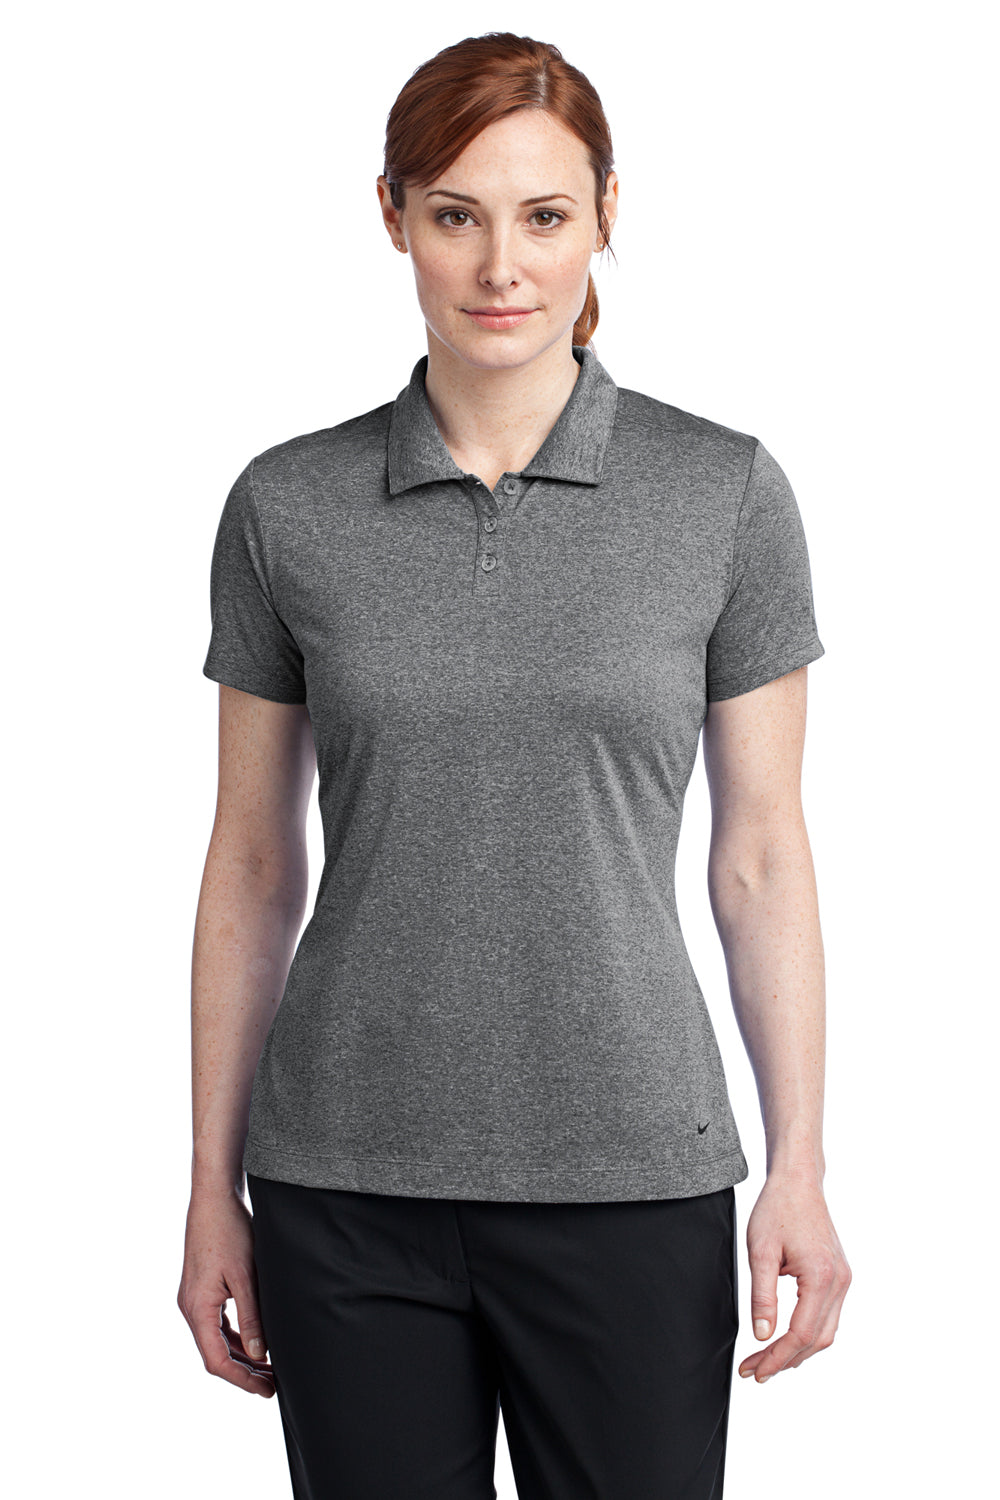 Nike 474455 Womens Dri-Fit Moisture Wicking Short Sleeve Polo Shirt Heather Carbon Grey Front